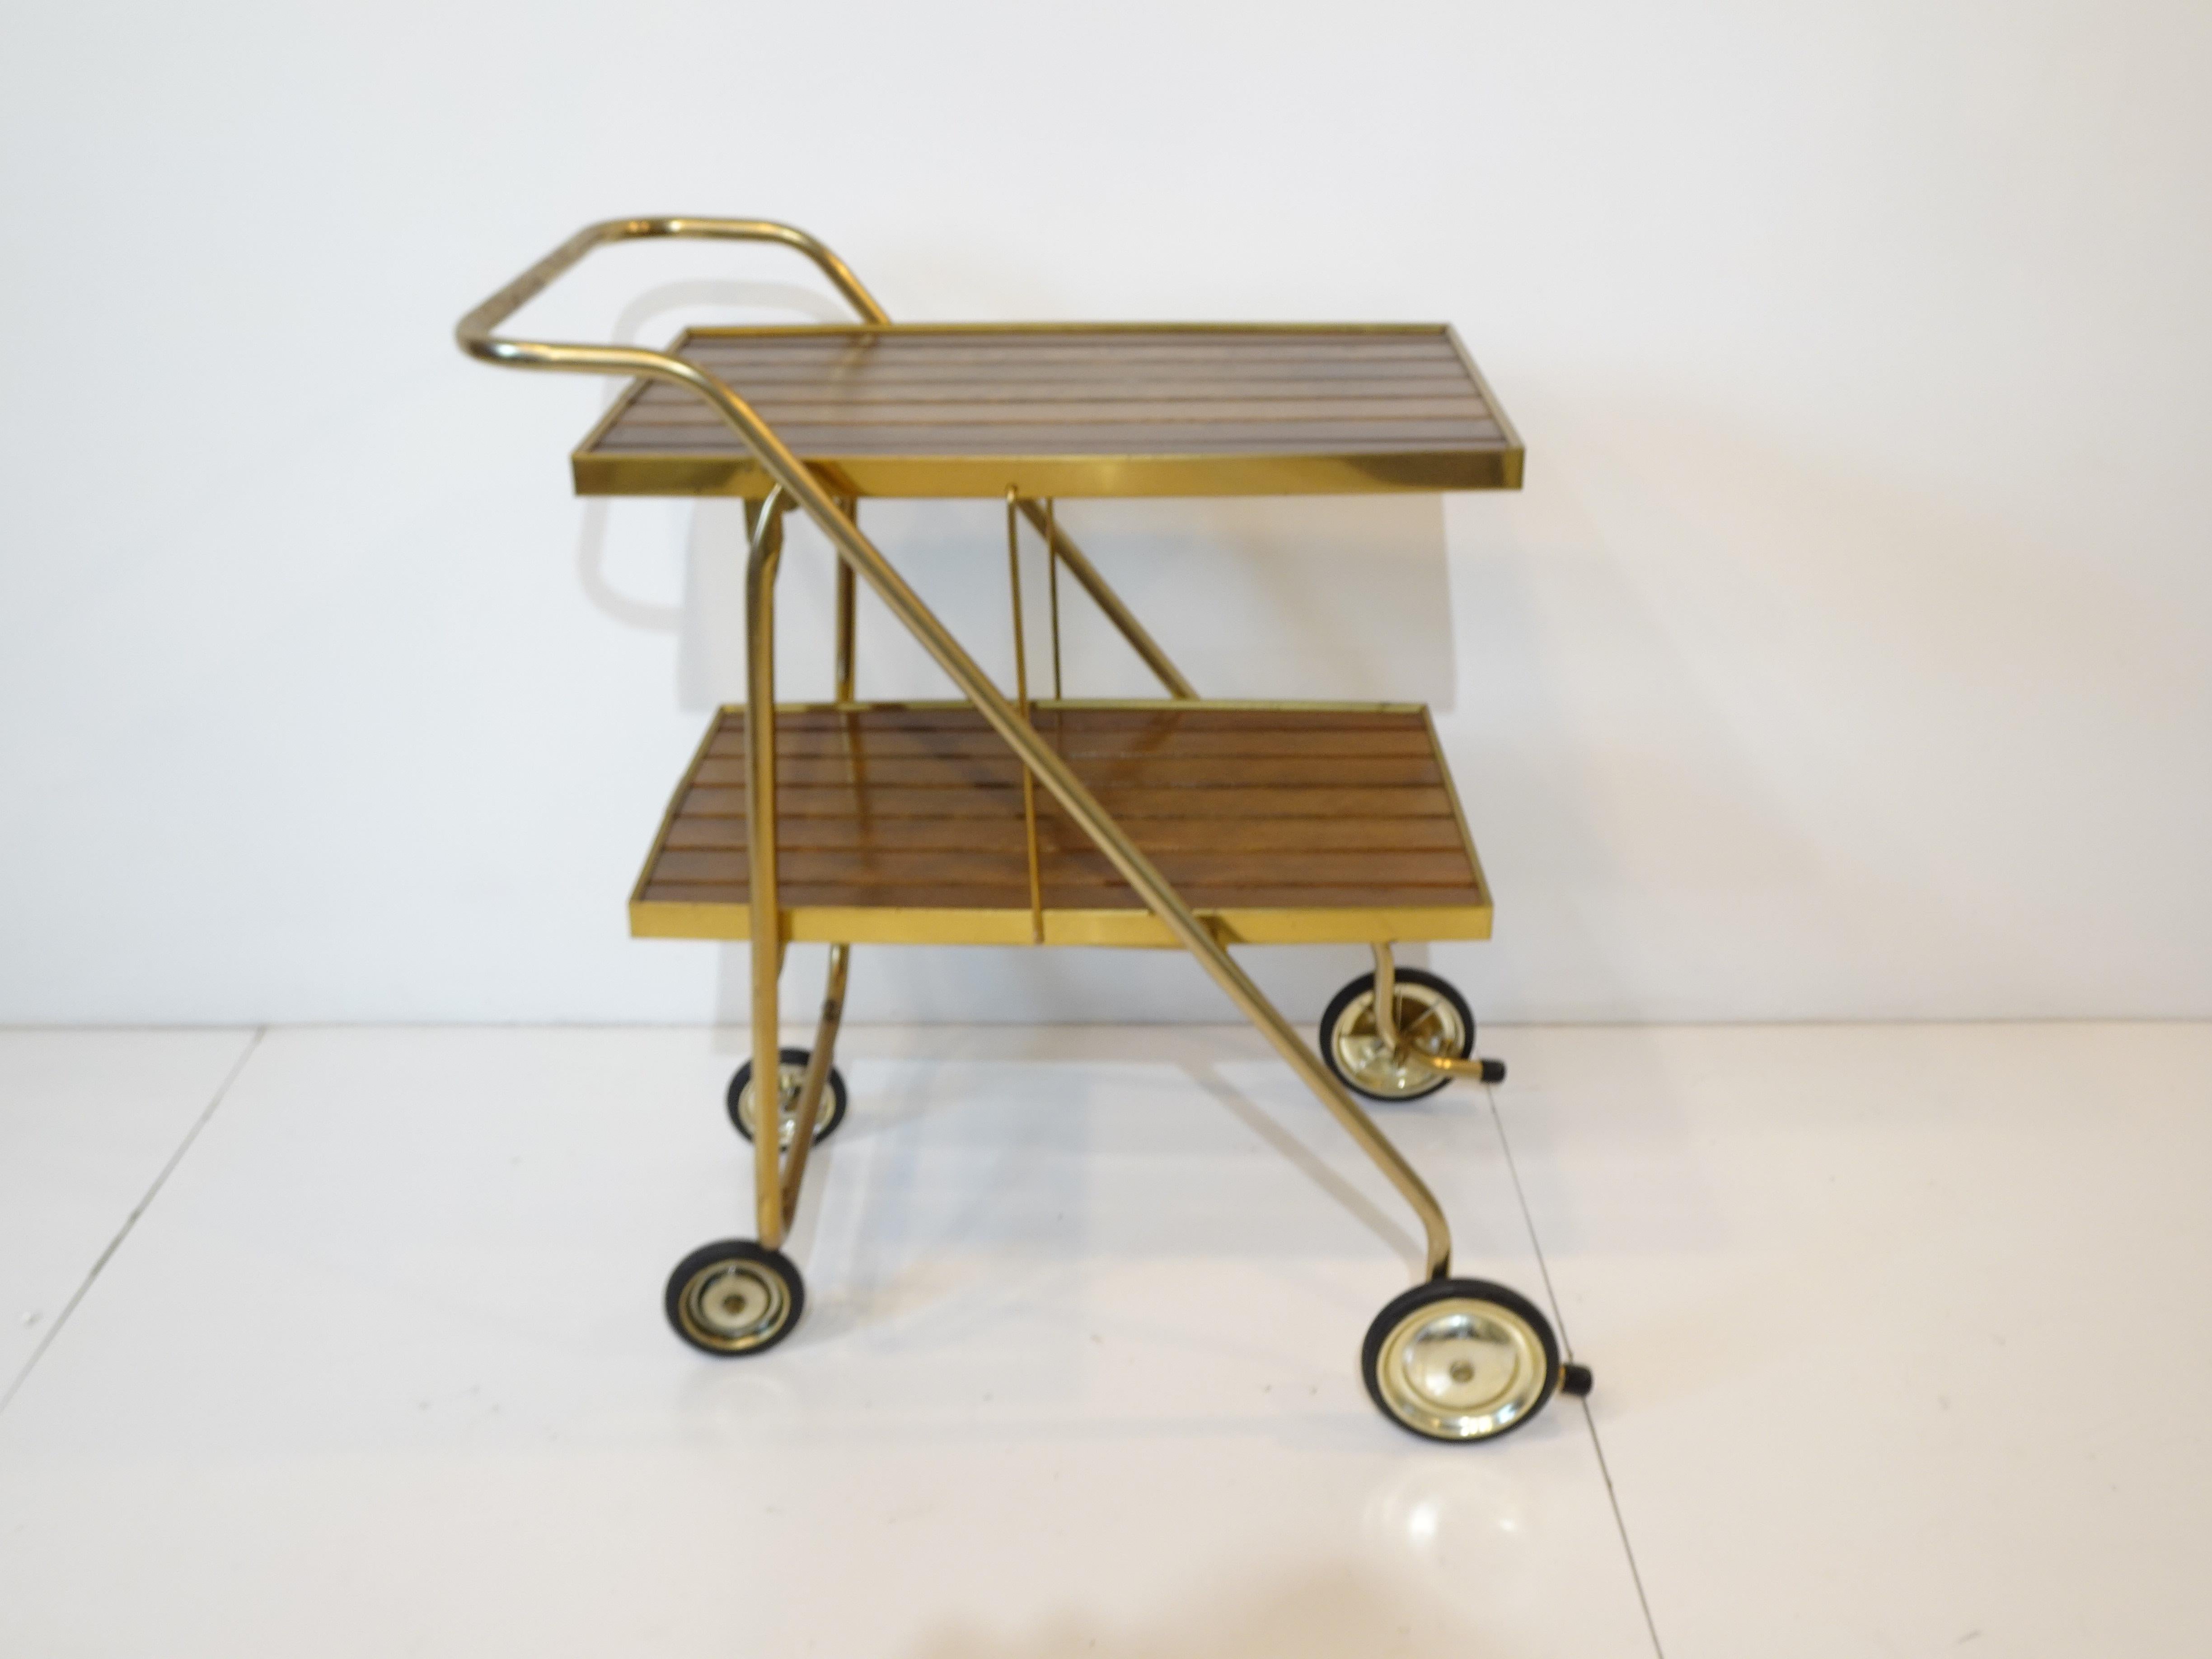 A brass toned metal framed folding bar cart trolley with darker wood slat top and bottom shelve having wheels with the rear ones that swivel for easy movement. This well thought out design folds tightly and compactly for storage or set up is very